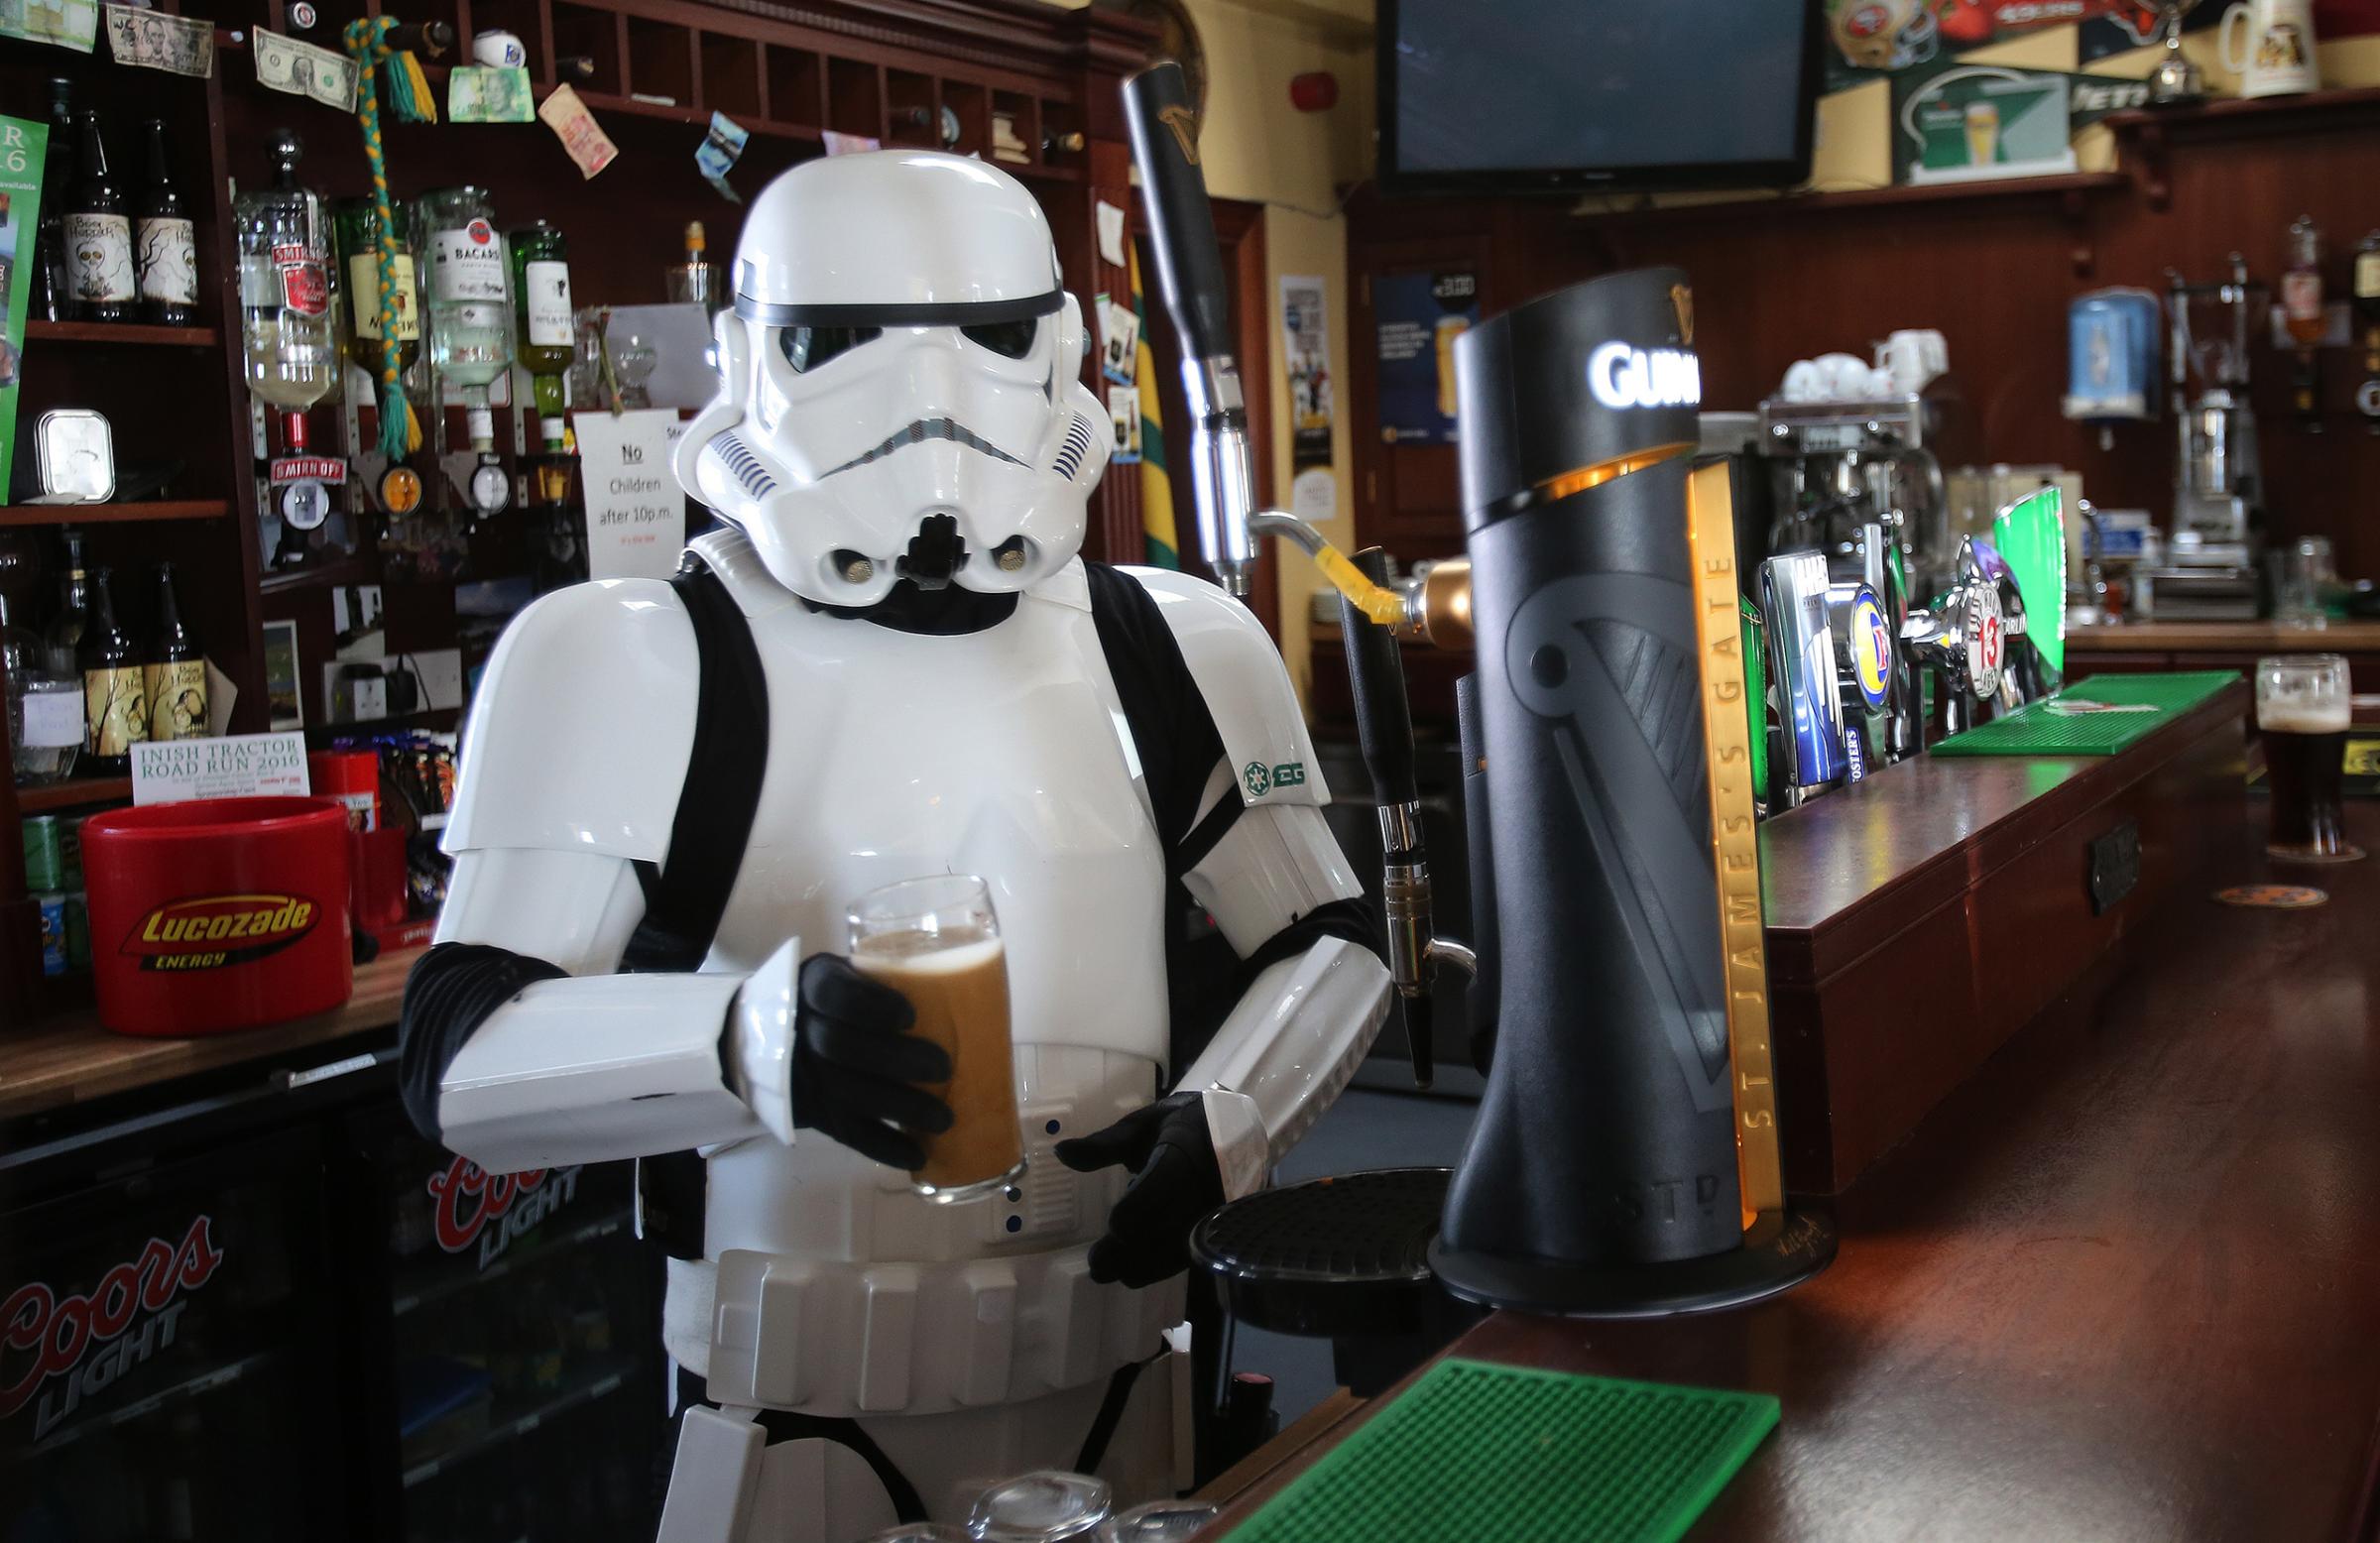 JJ McGettigan from the Emerald Garrison, a star Wars costuming club, in Farrens Bar in Malin Head, Co Donegal Ireland, as filming for the next Star Wars movie will take place there, May 12, 2016.